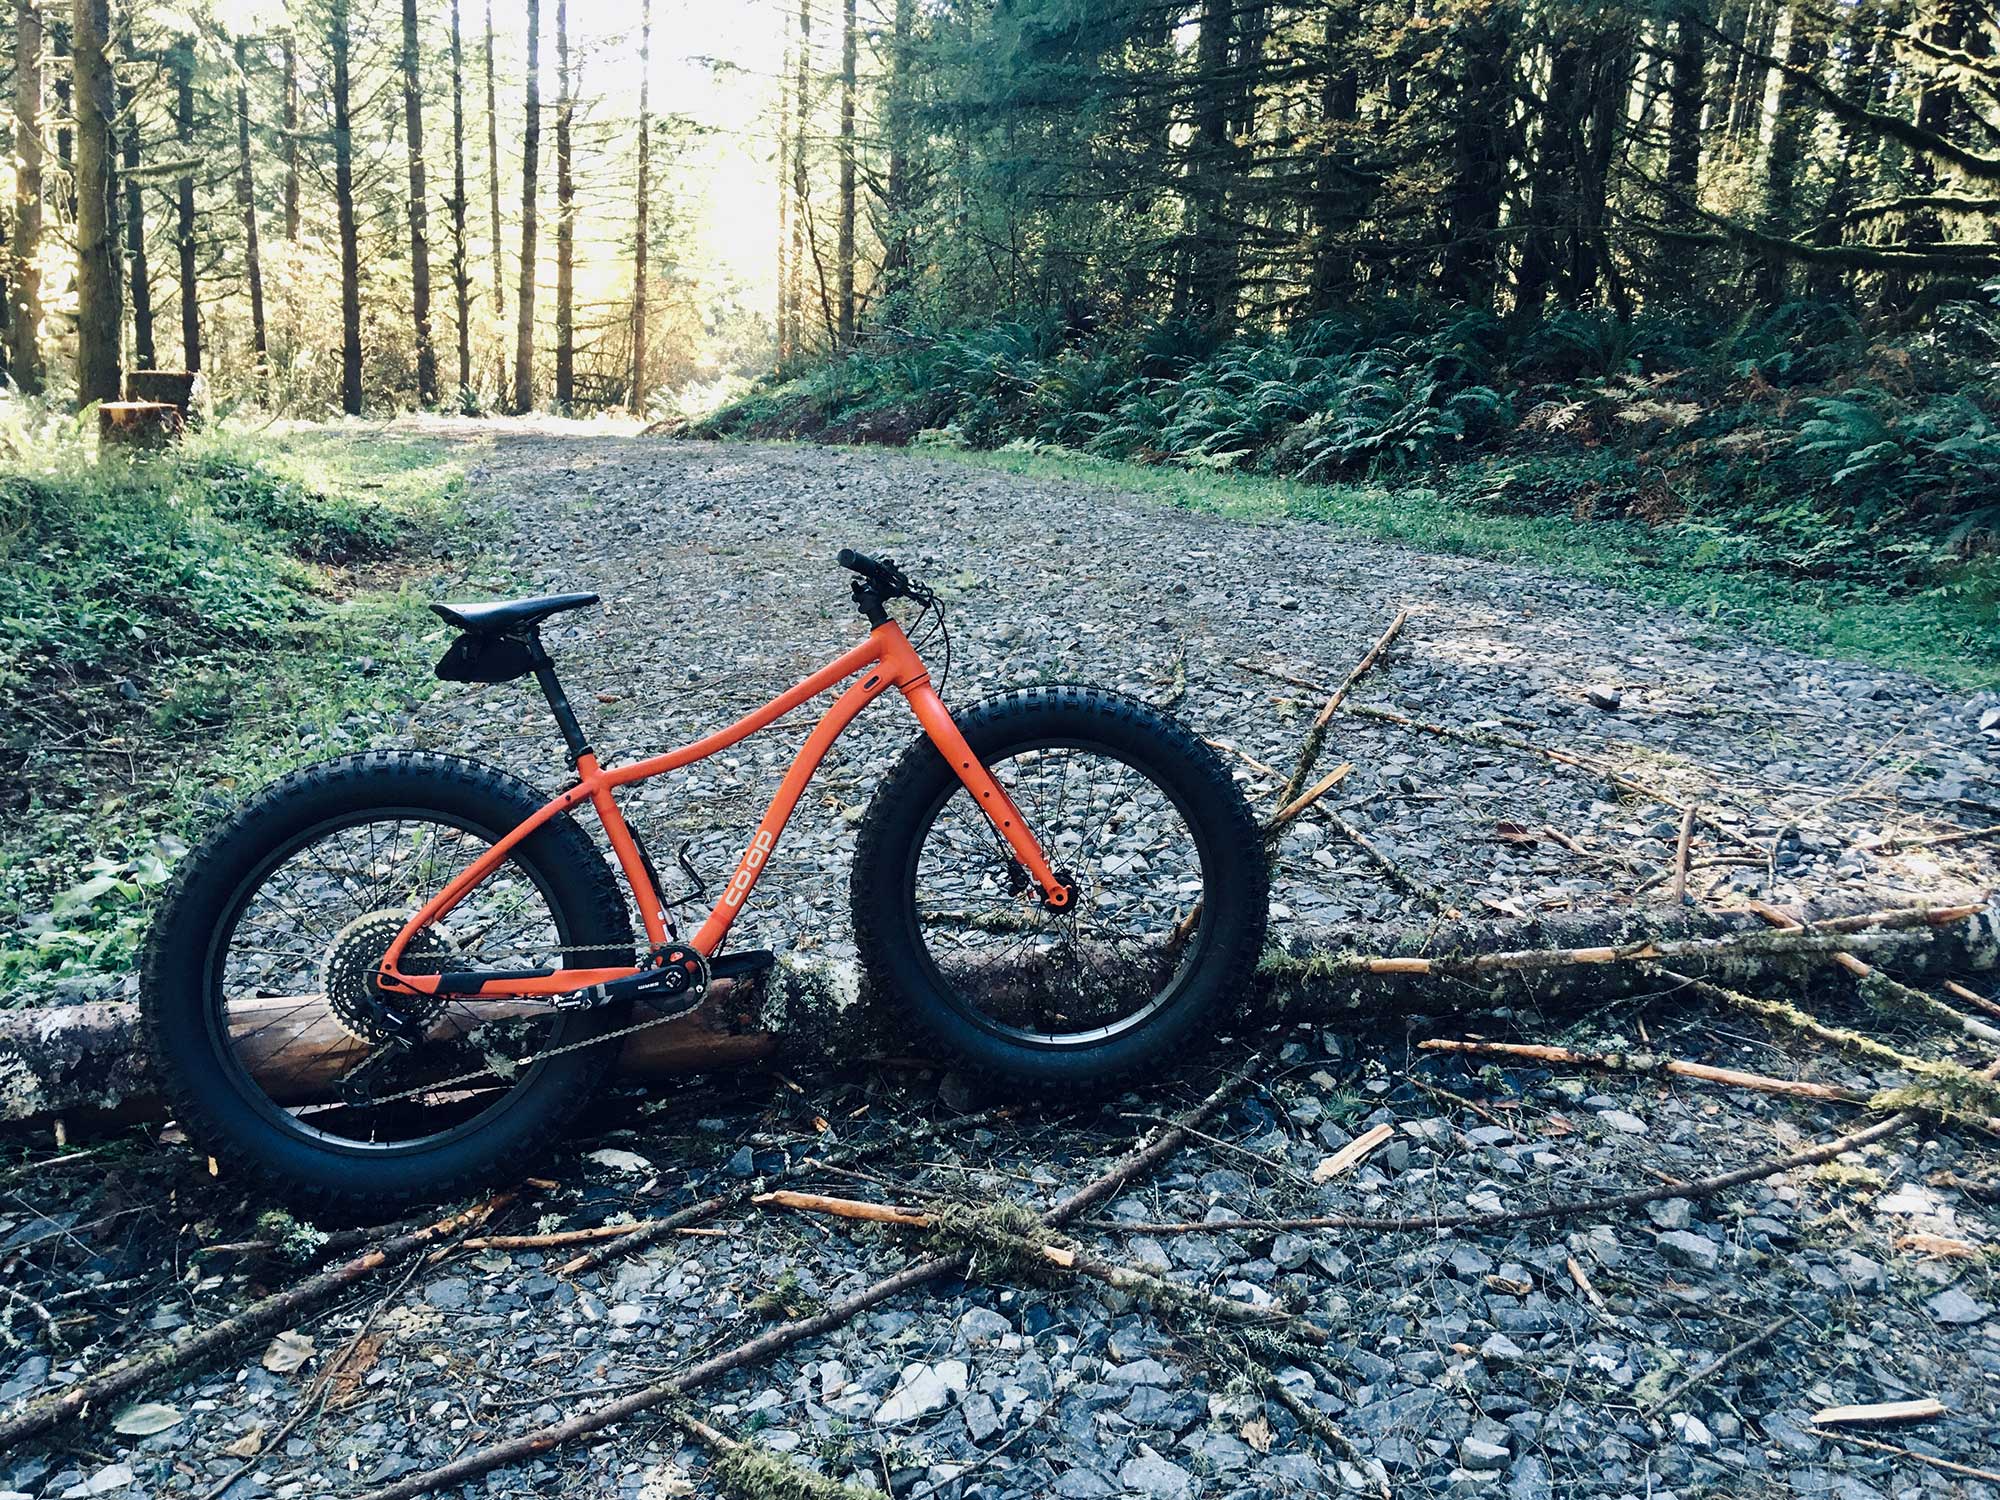 Orange bike with fat tires leaning against a log on a gravel road in the forest